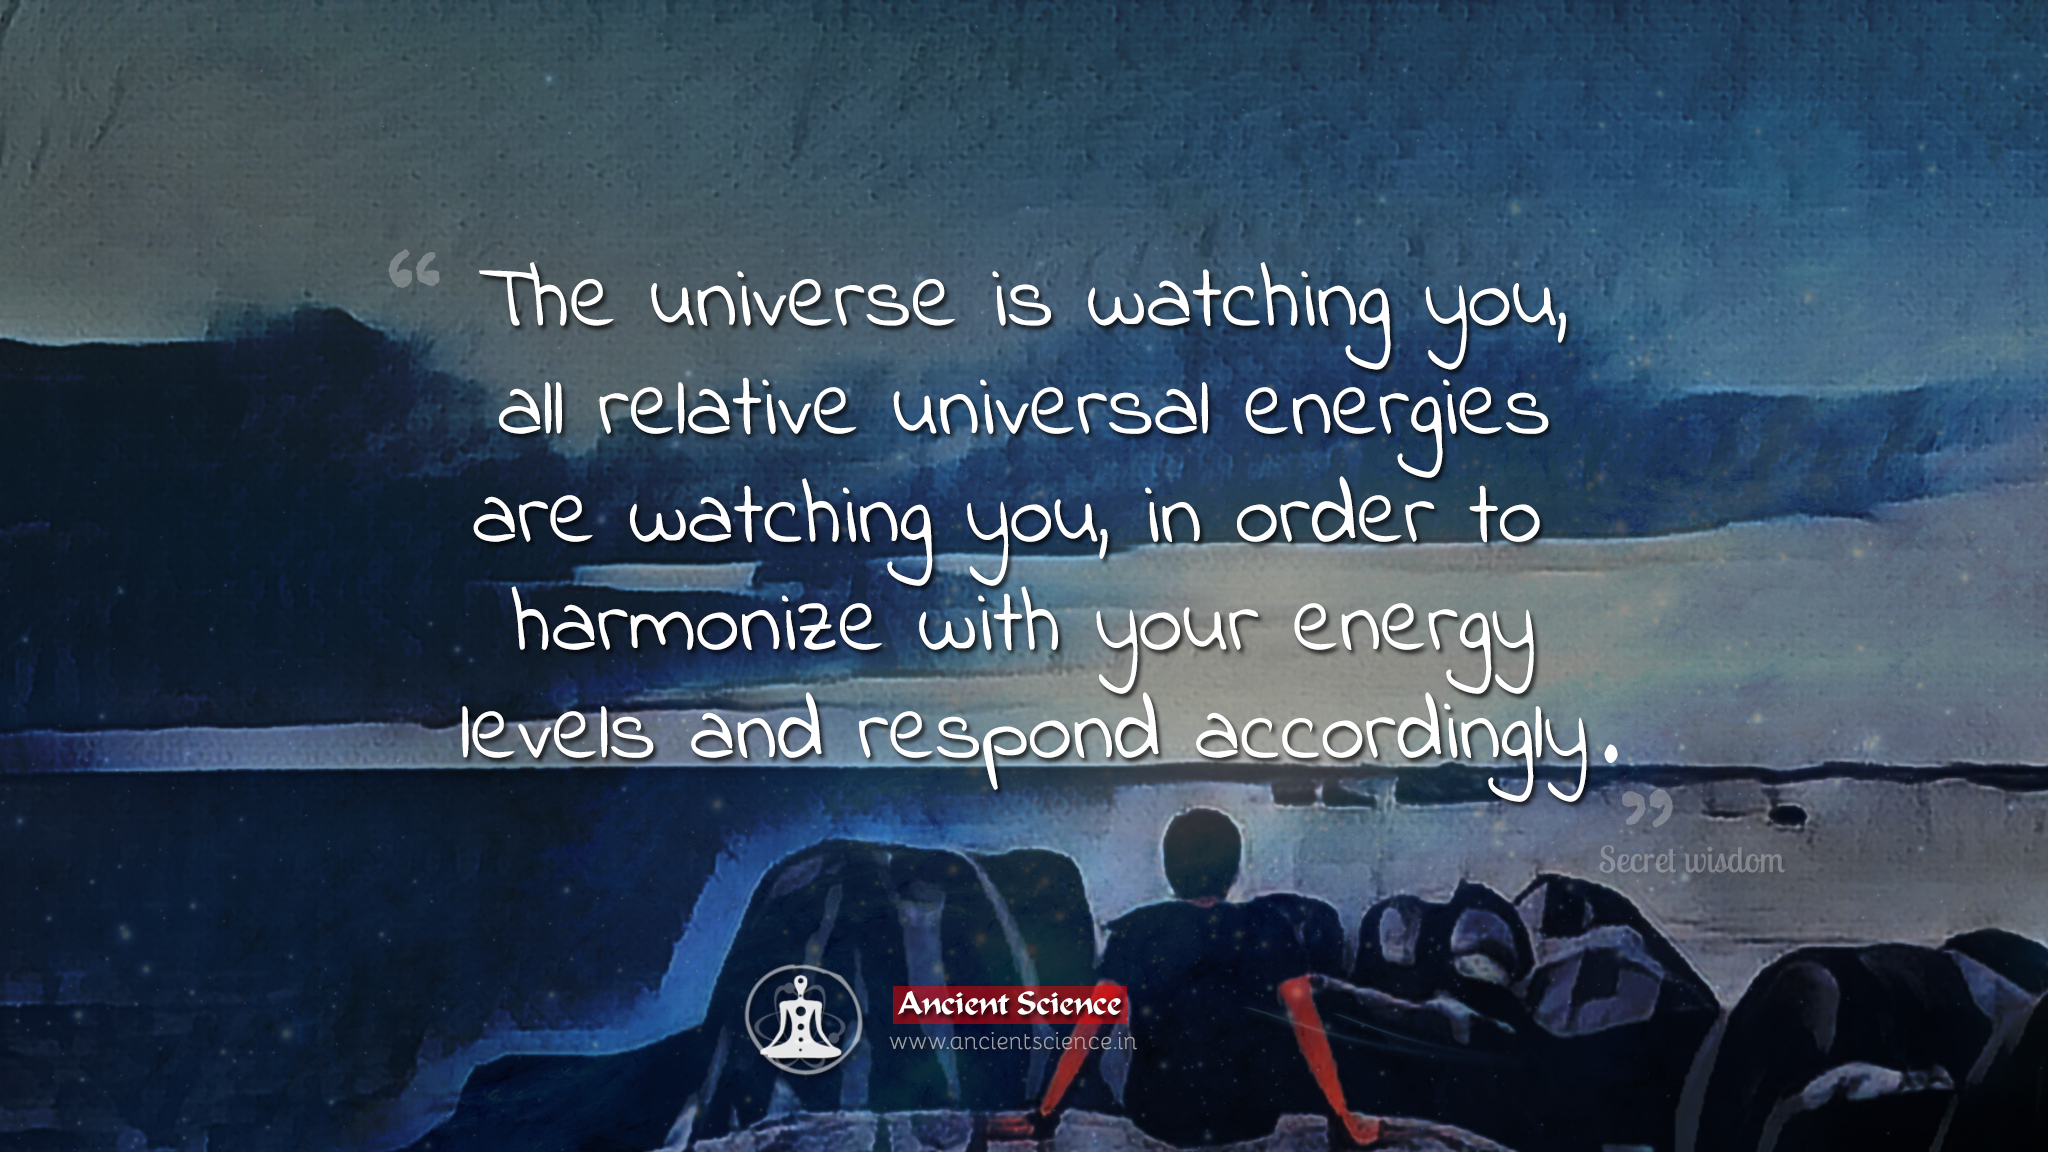 The universe is watching you, all relative universal energies are watching you, in order to harmonize with your energy levels and respond accordingly